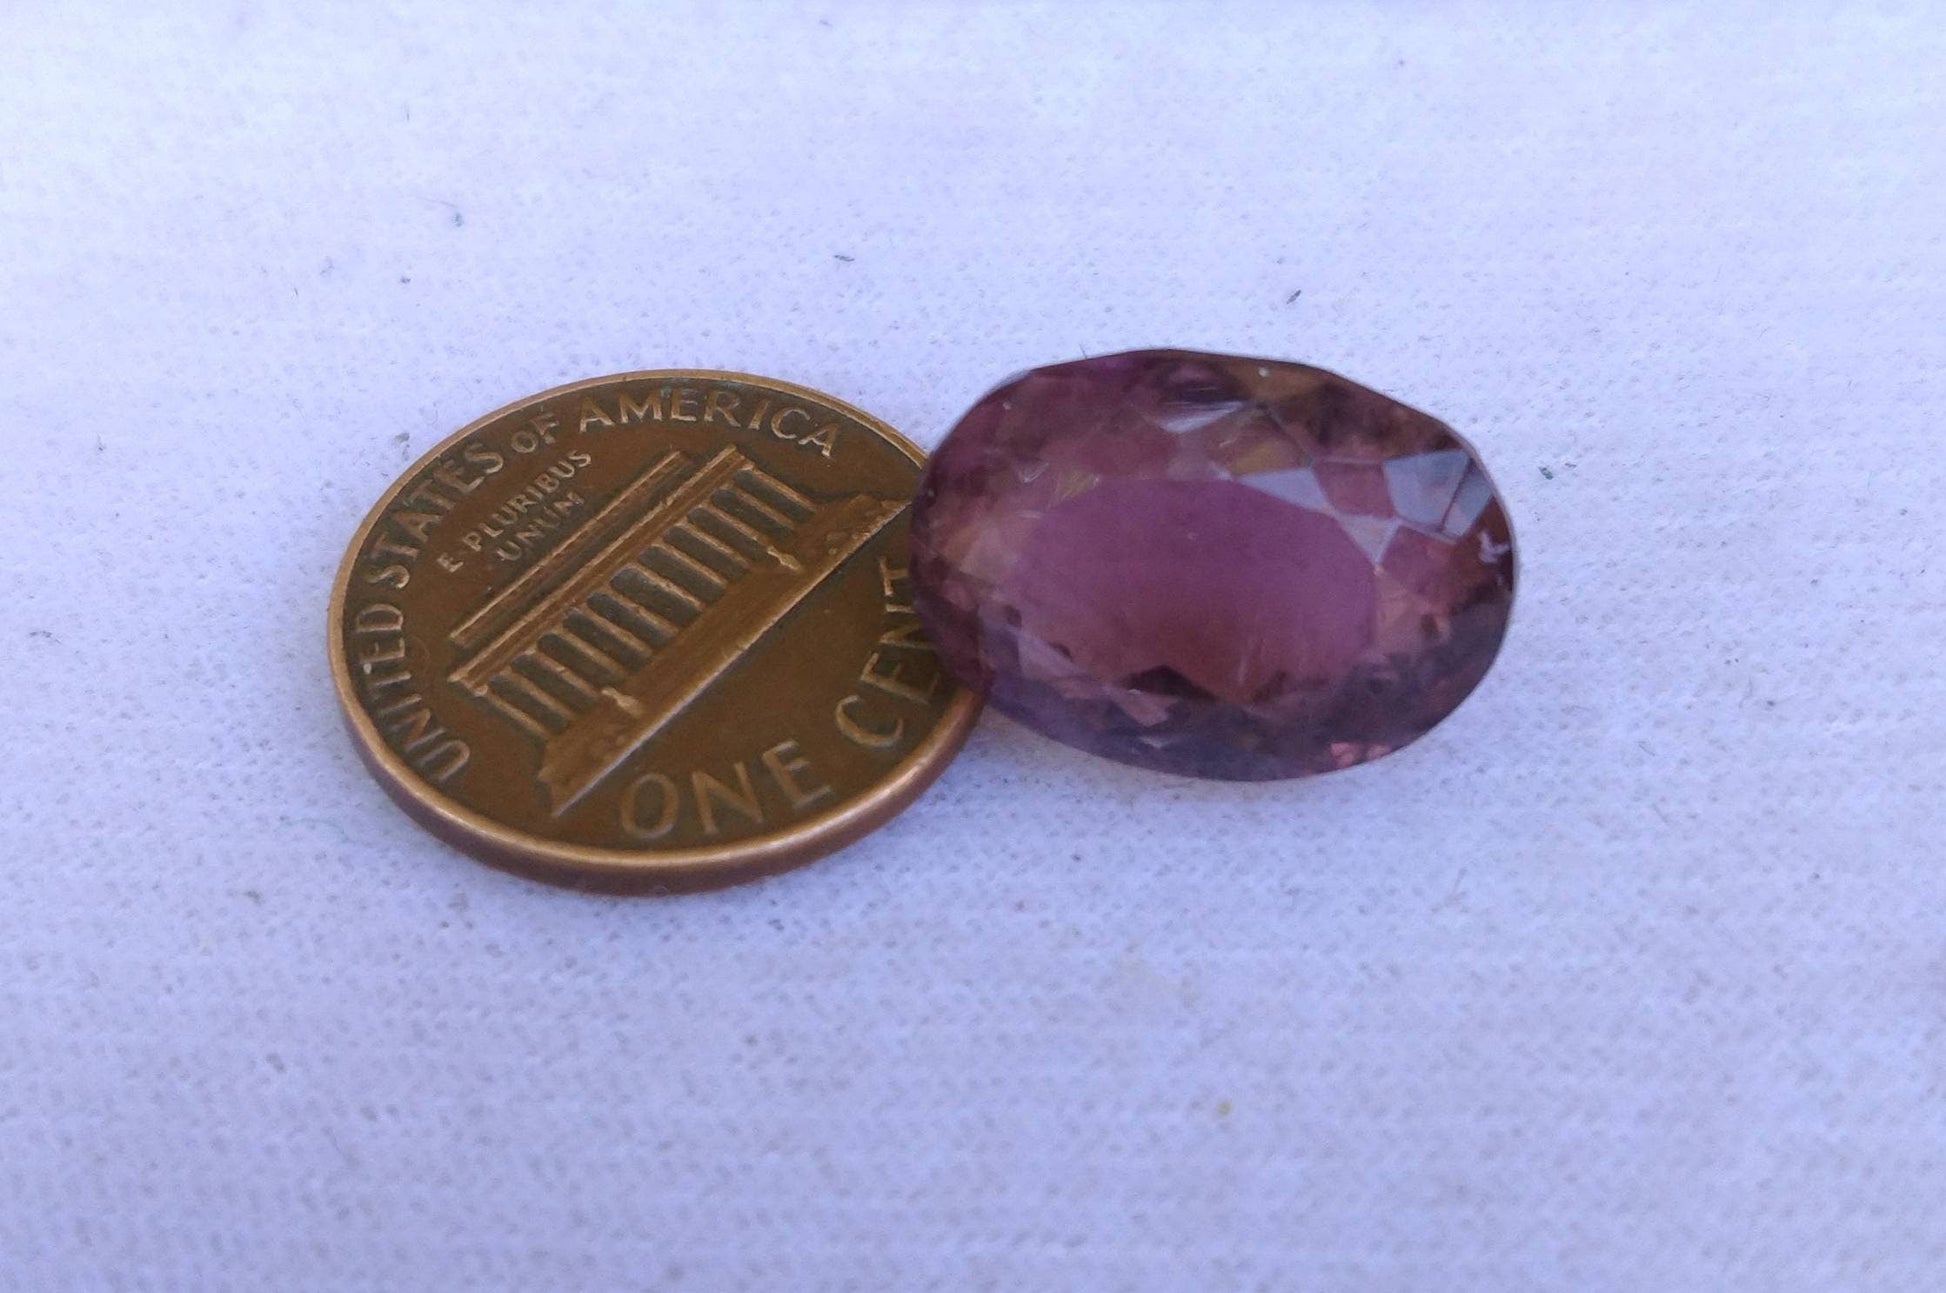 ARSAA GEMS AND MINERALSNatural top quality beautiful 14 carats oval shape deep purple VV clarity faceted amethyst gem - Premium  from ARSAA GEMS AND MINERALS - Just $40.00! Shop now at ARSAA GEMS AND MINERALS